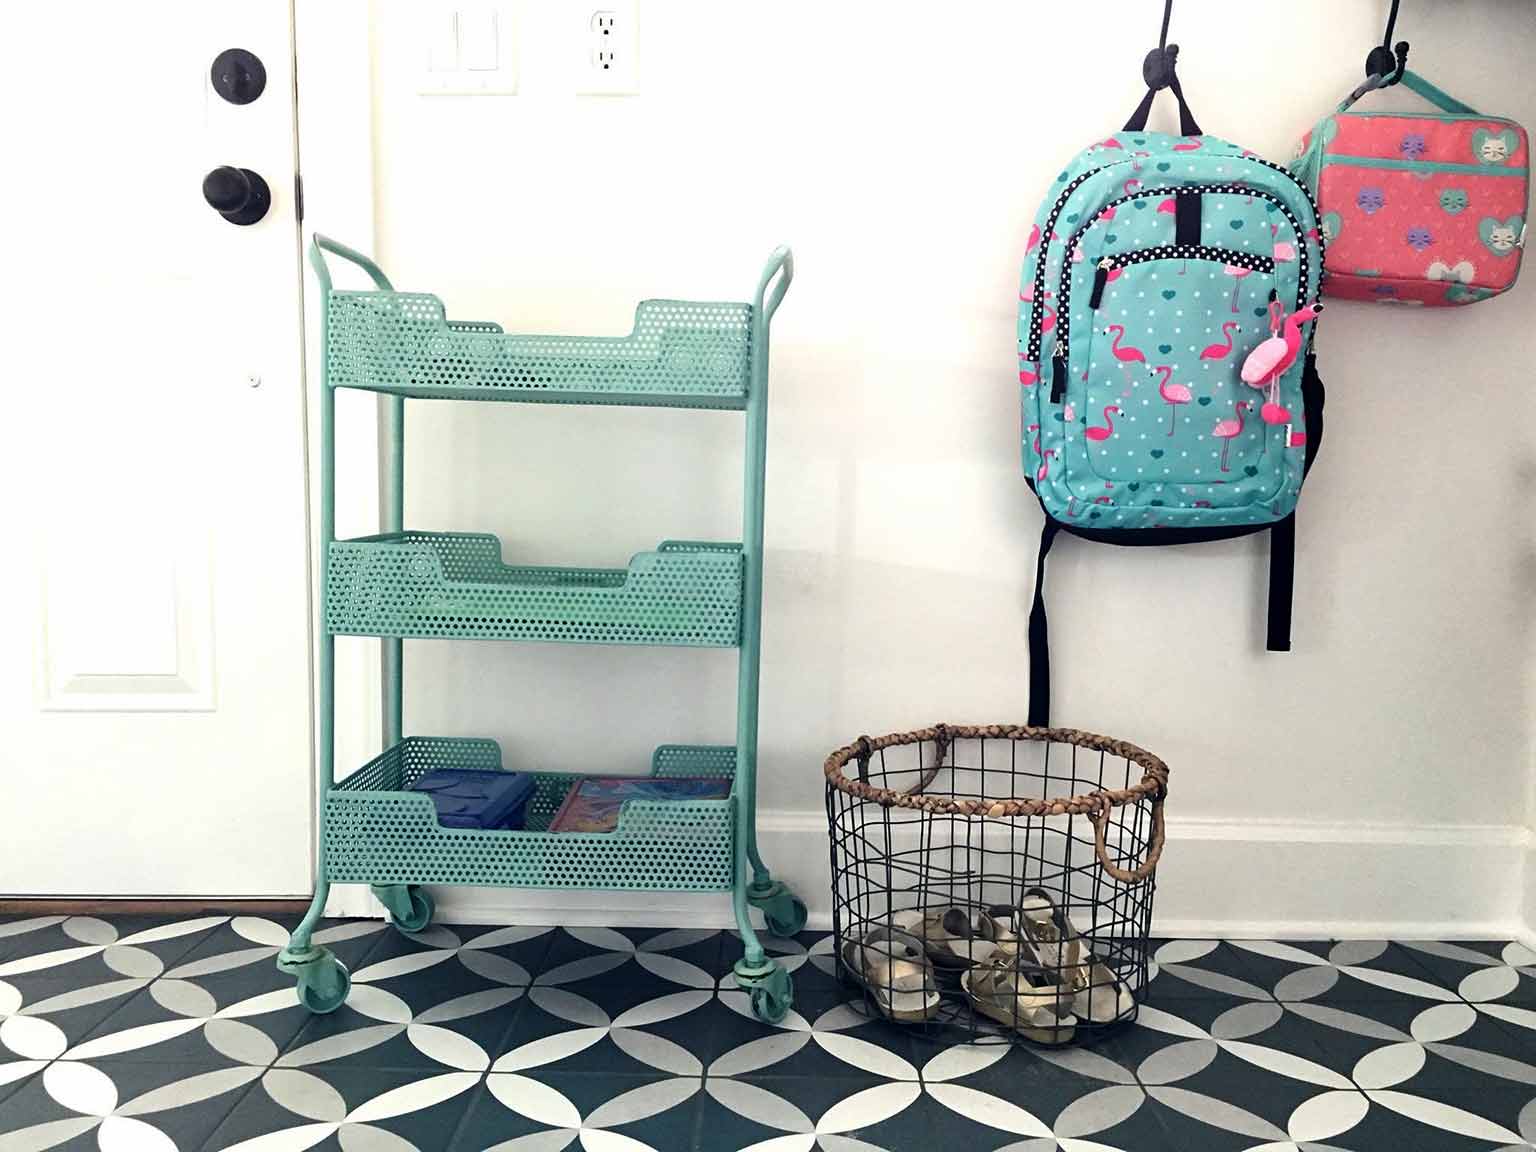 How to Organize Your Kids' Artwork and Keep it that Way!